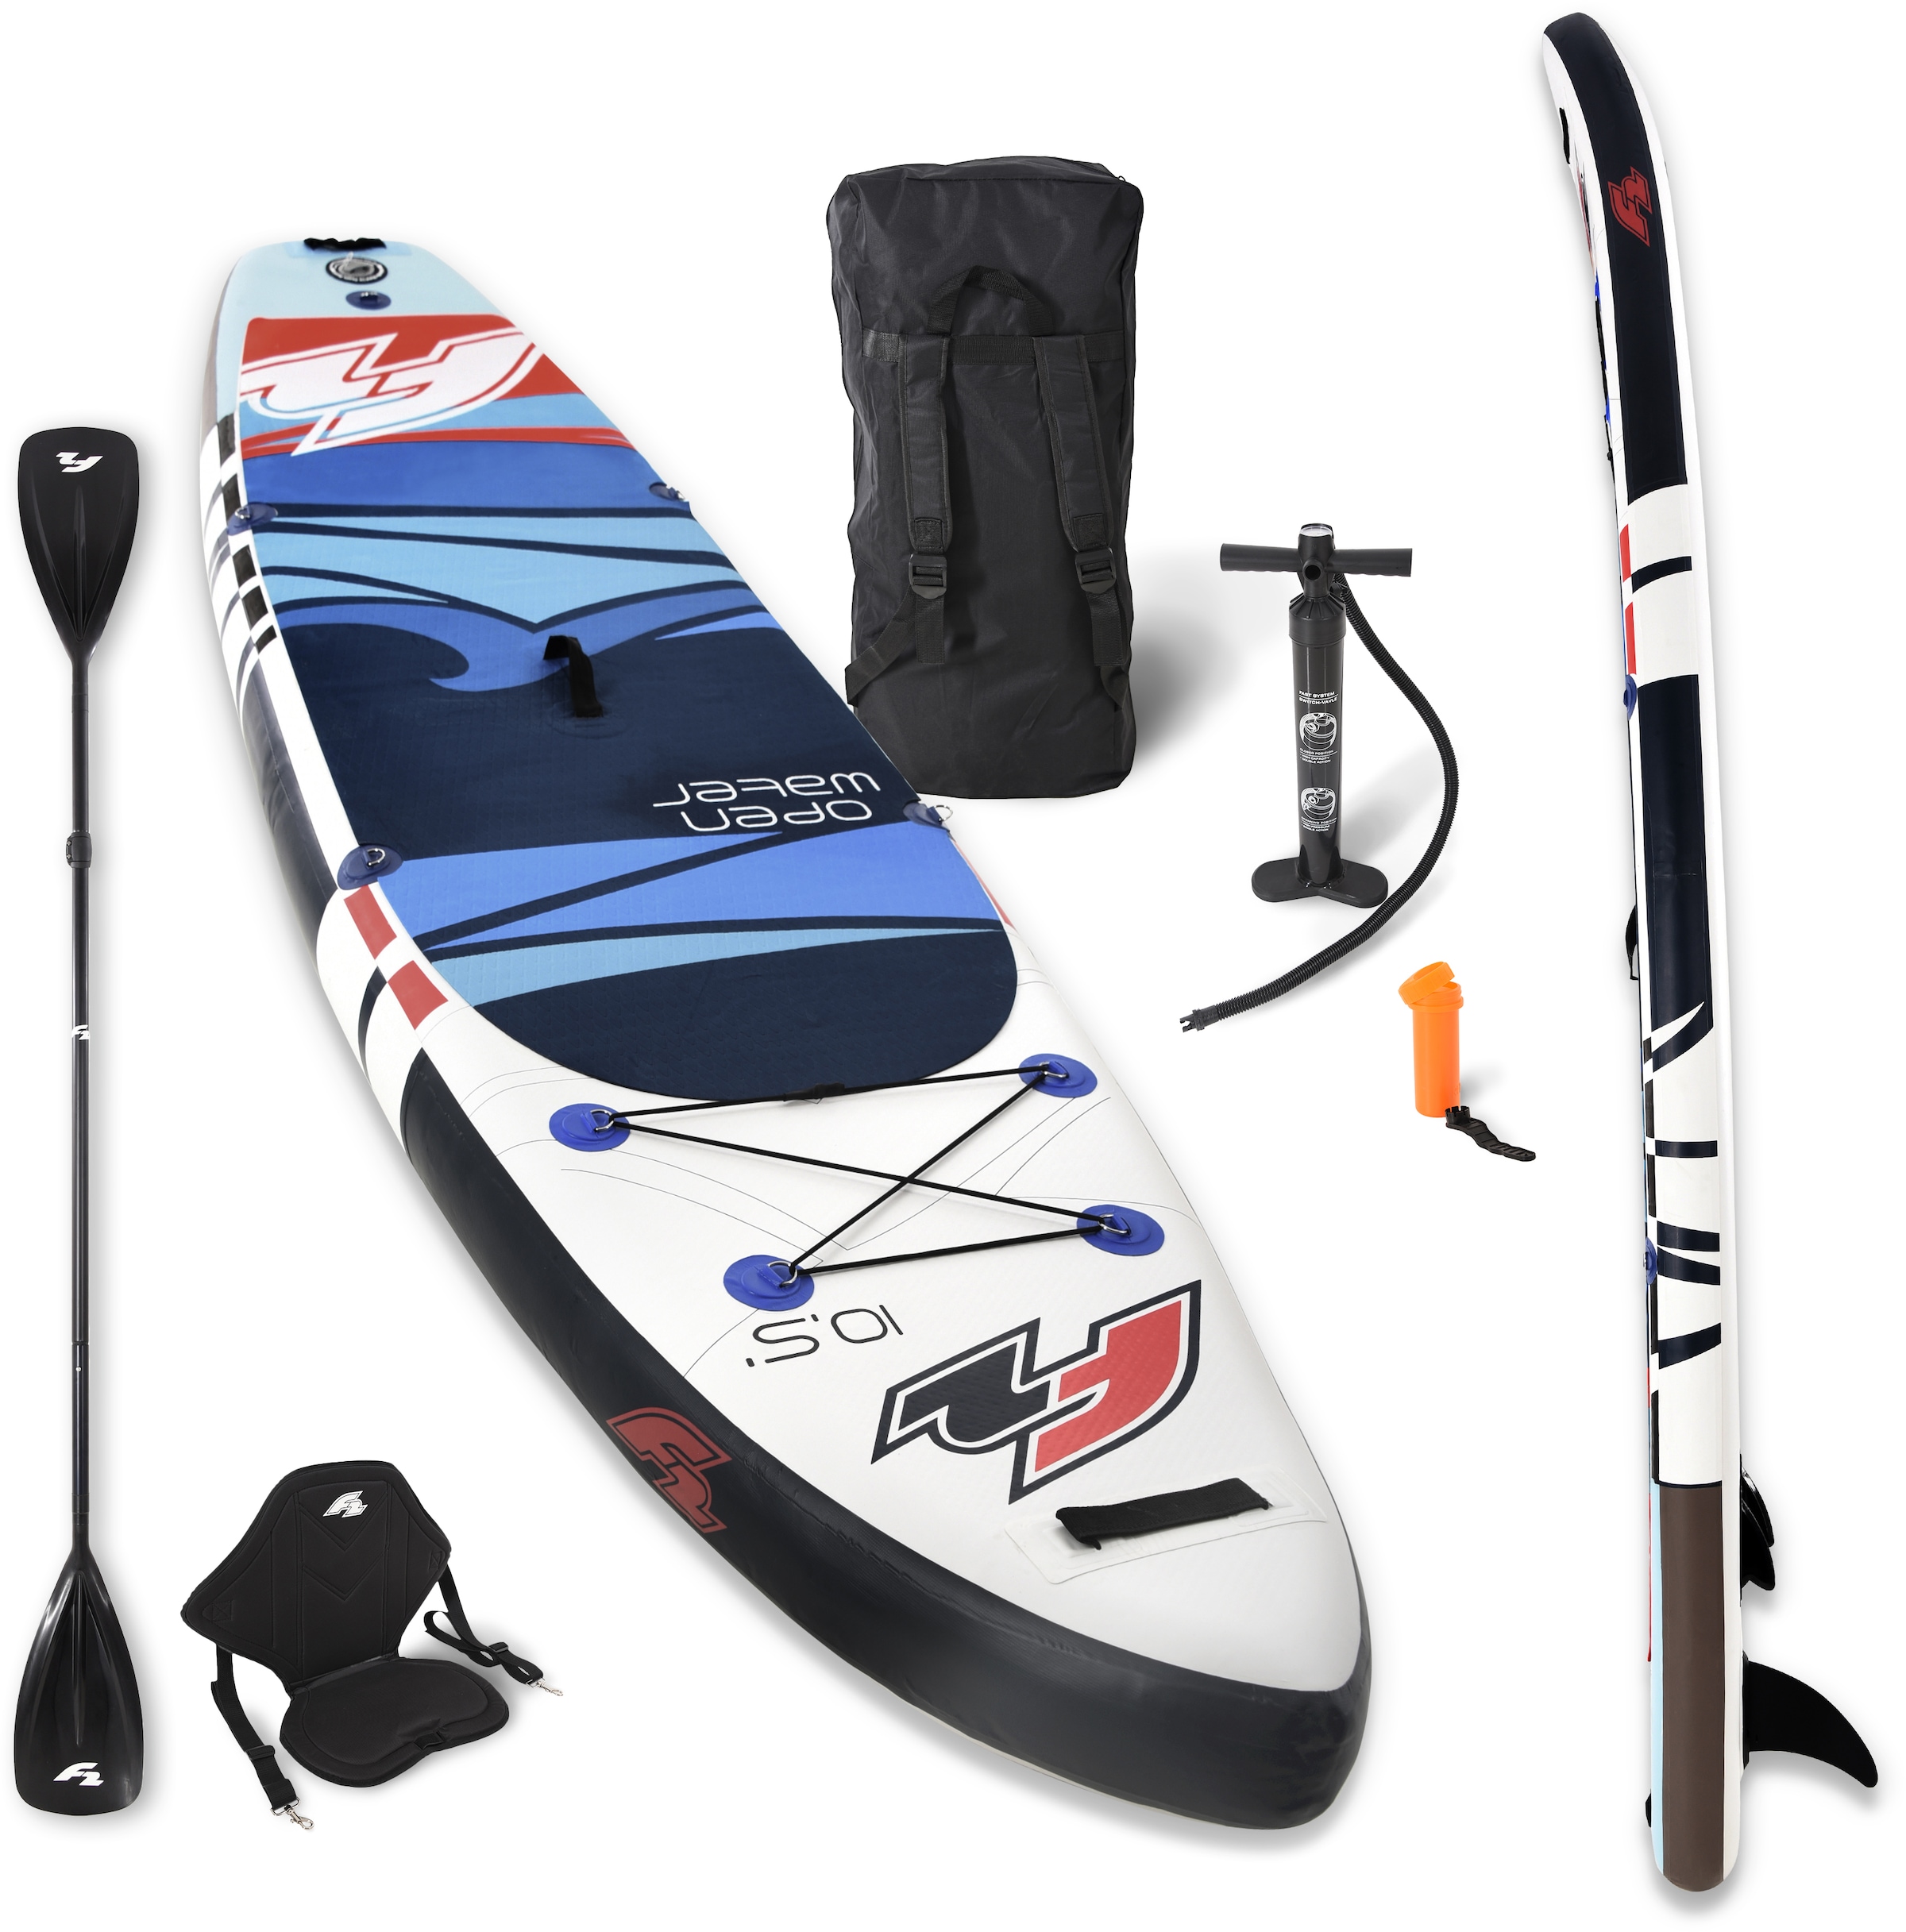 Stand-Up-Paddle online UNIVERSAL | Moderne SUP-Boards bei kaufen